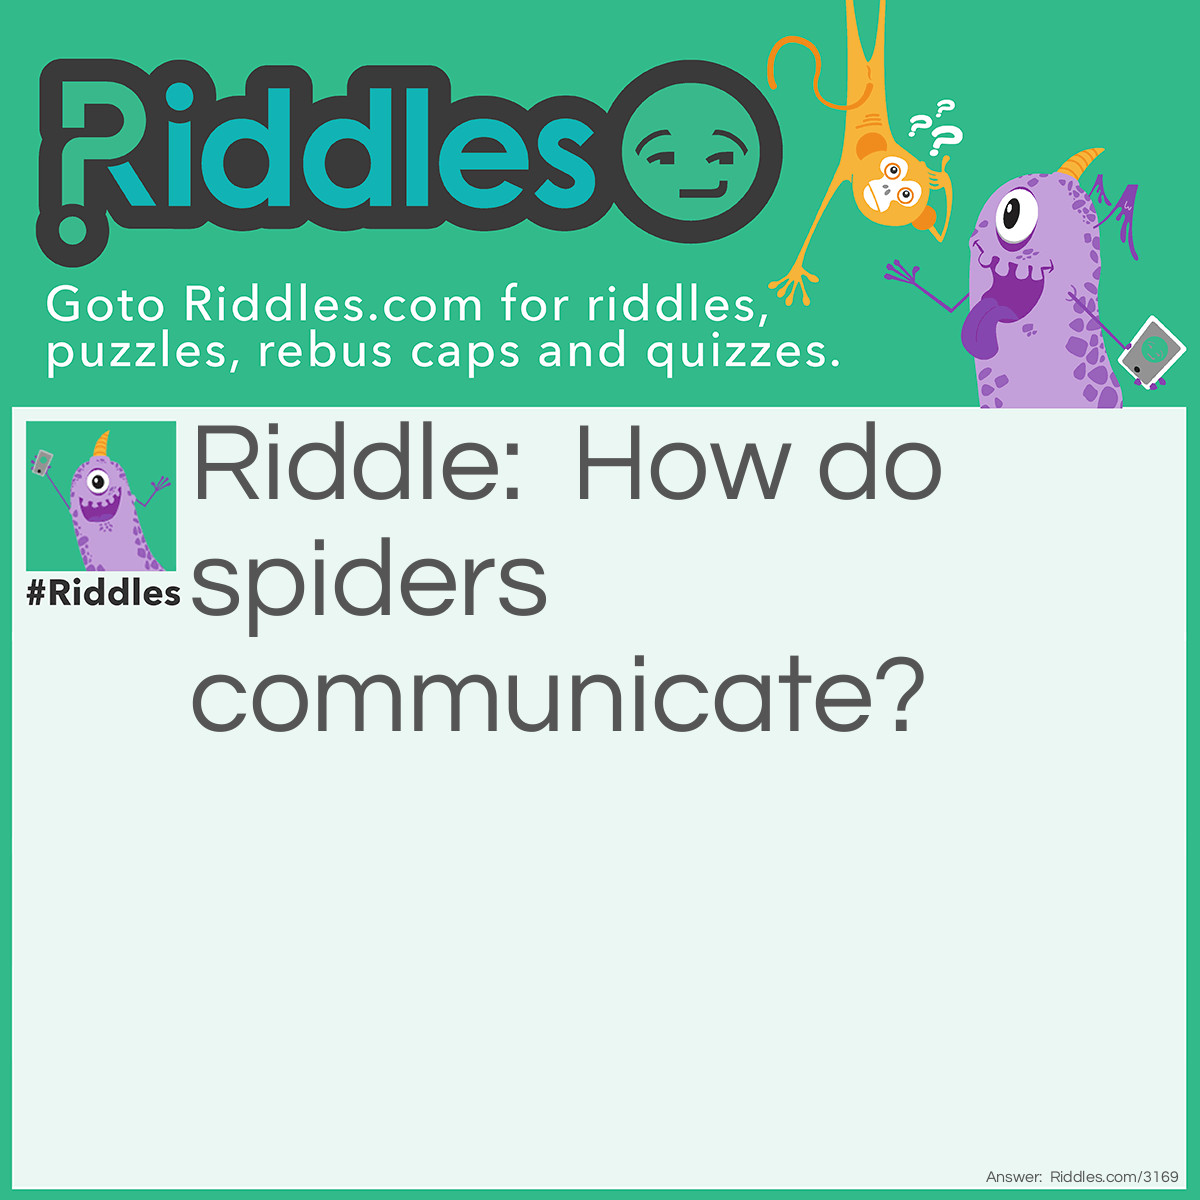 Riddle: How do spiders communicate? Answer: Through the worldwide web.